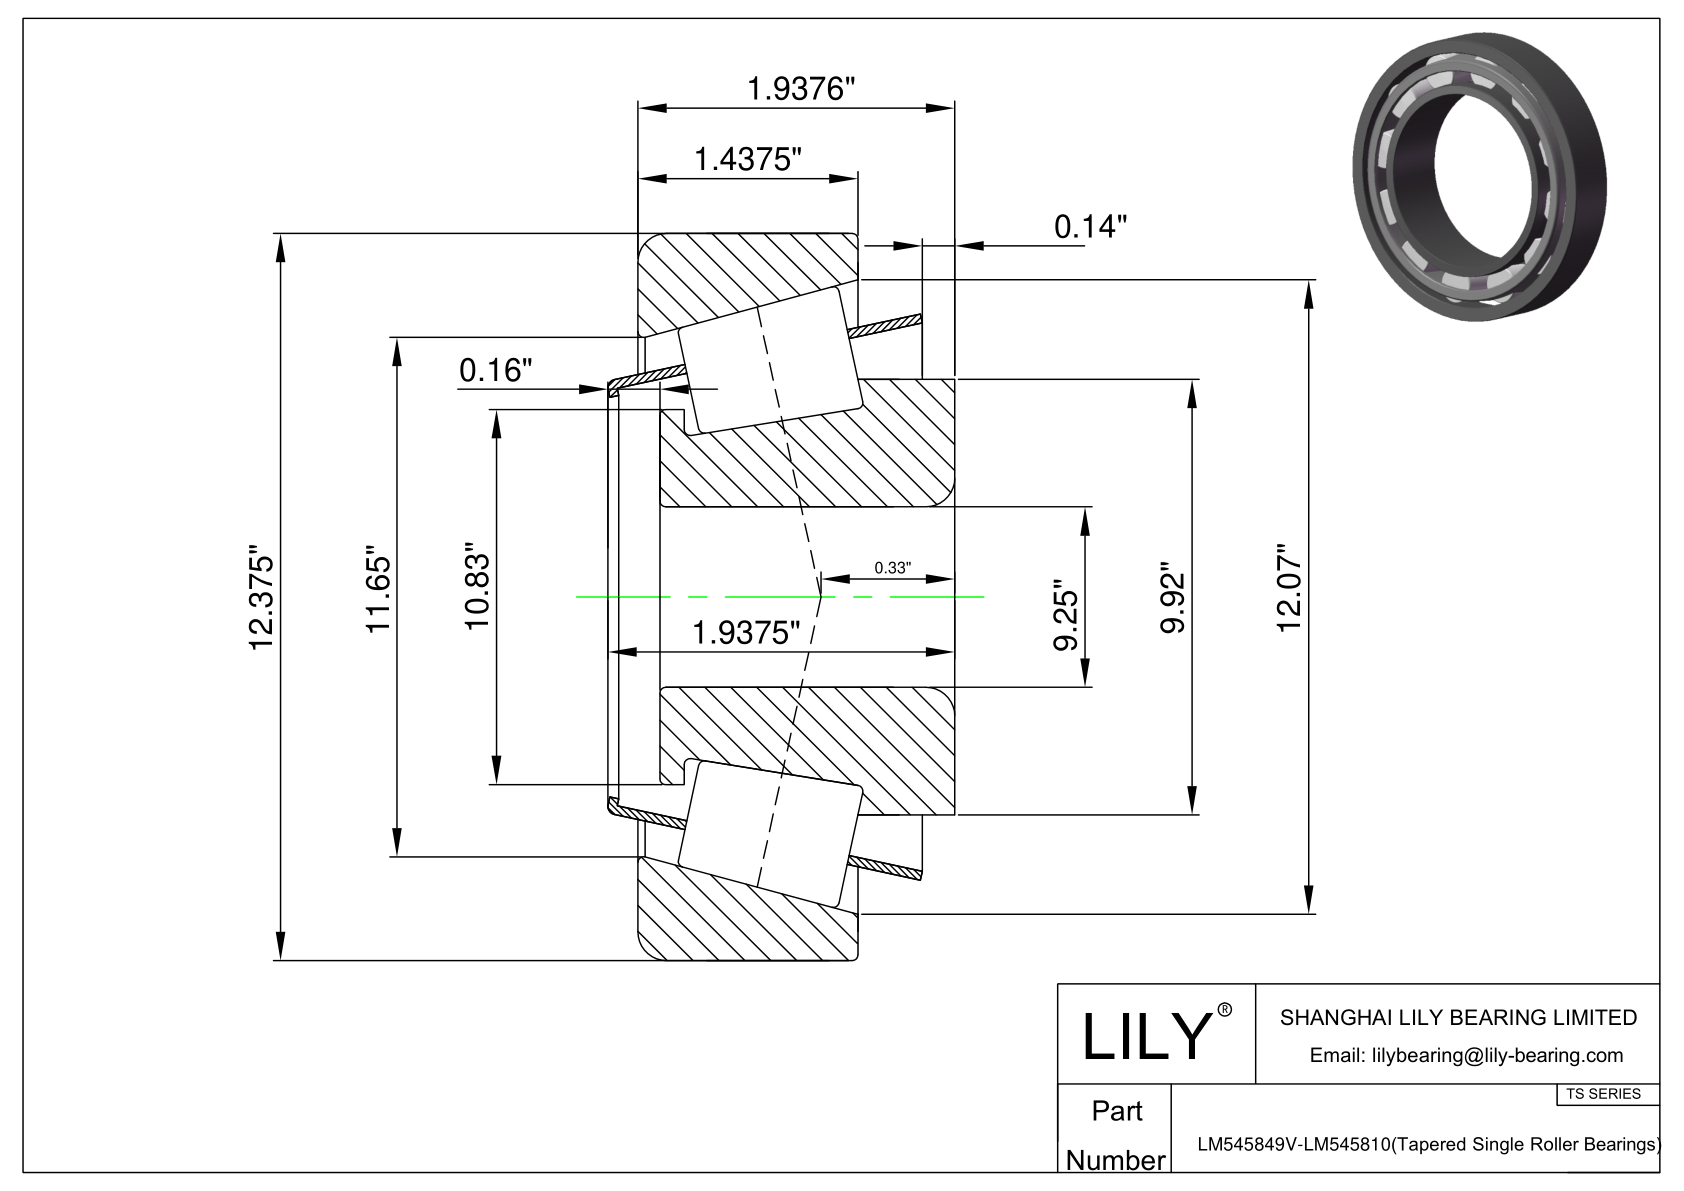 LM545849V-LM545810 TS (Tapered Single Roller Bearings) (Imperial) cad drawing